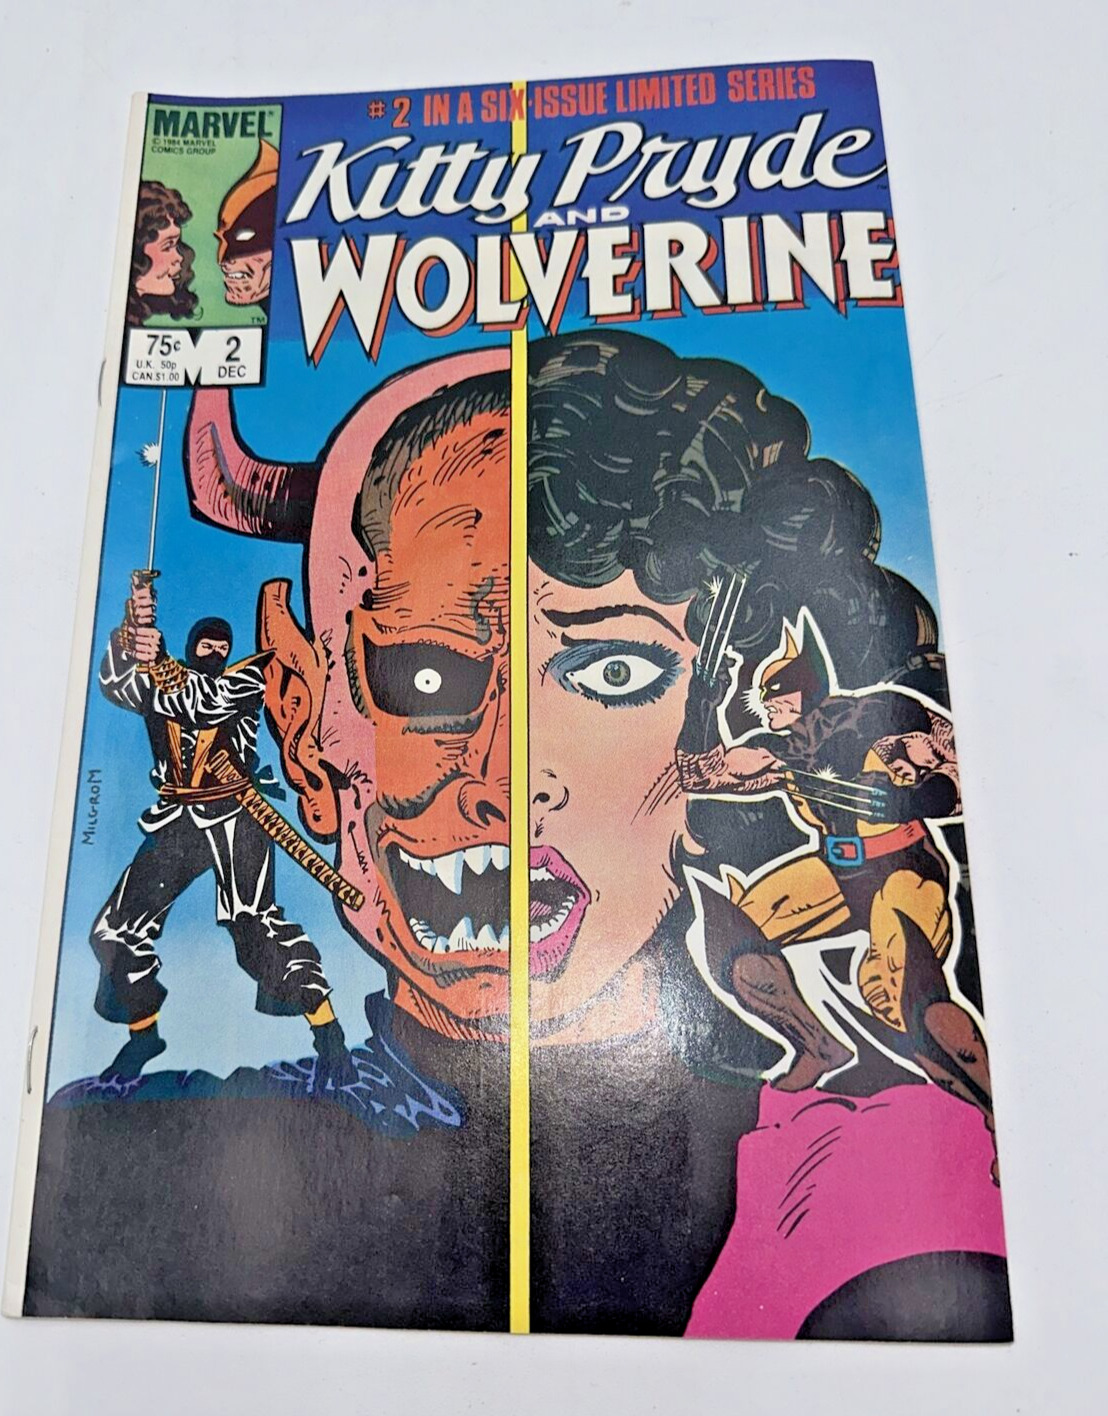 KITTY PRYDE & WOLVERINE #2 - 1984 MARVEL COMIC - COPPER AGE - LIMITED SERIES